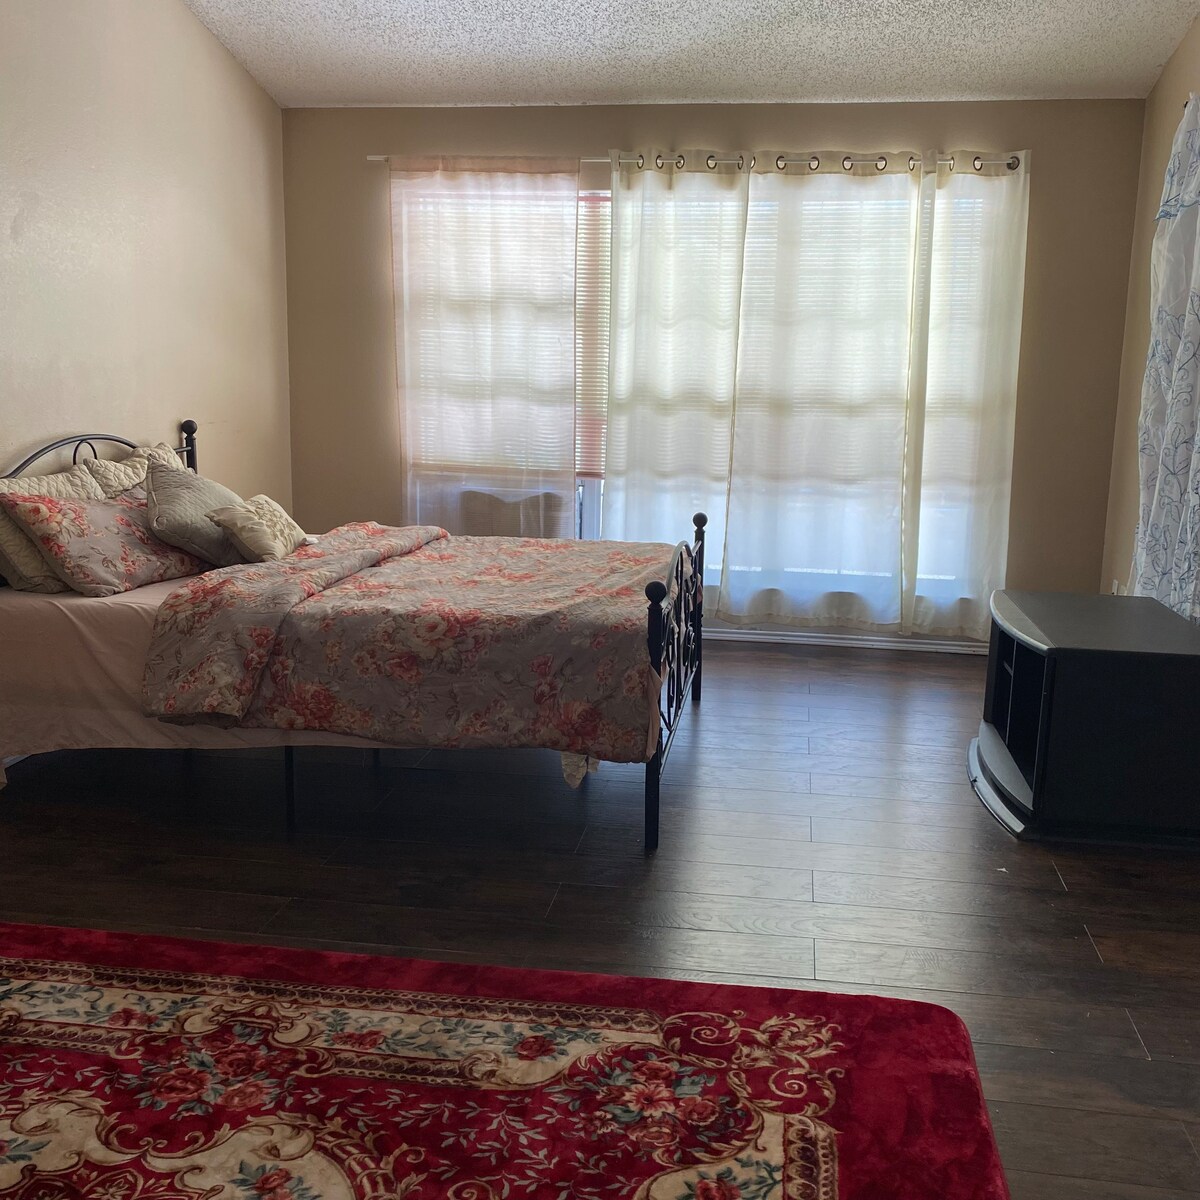 Rooms for rent $1200